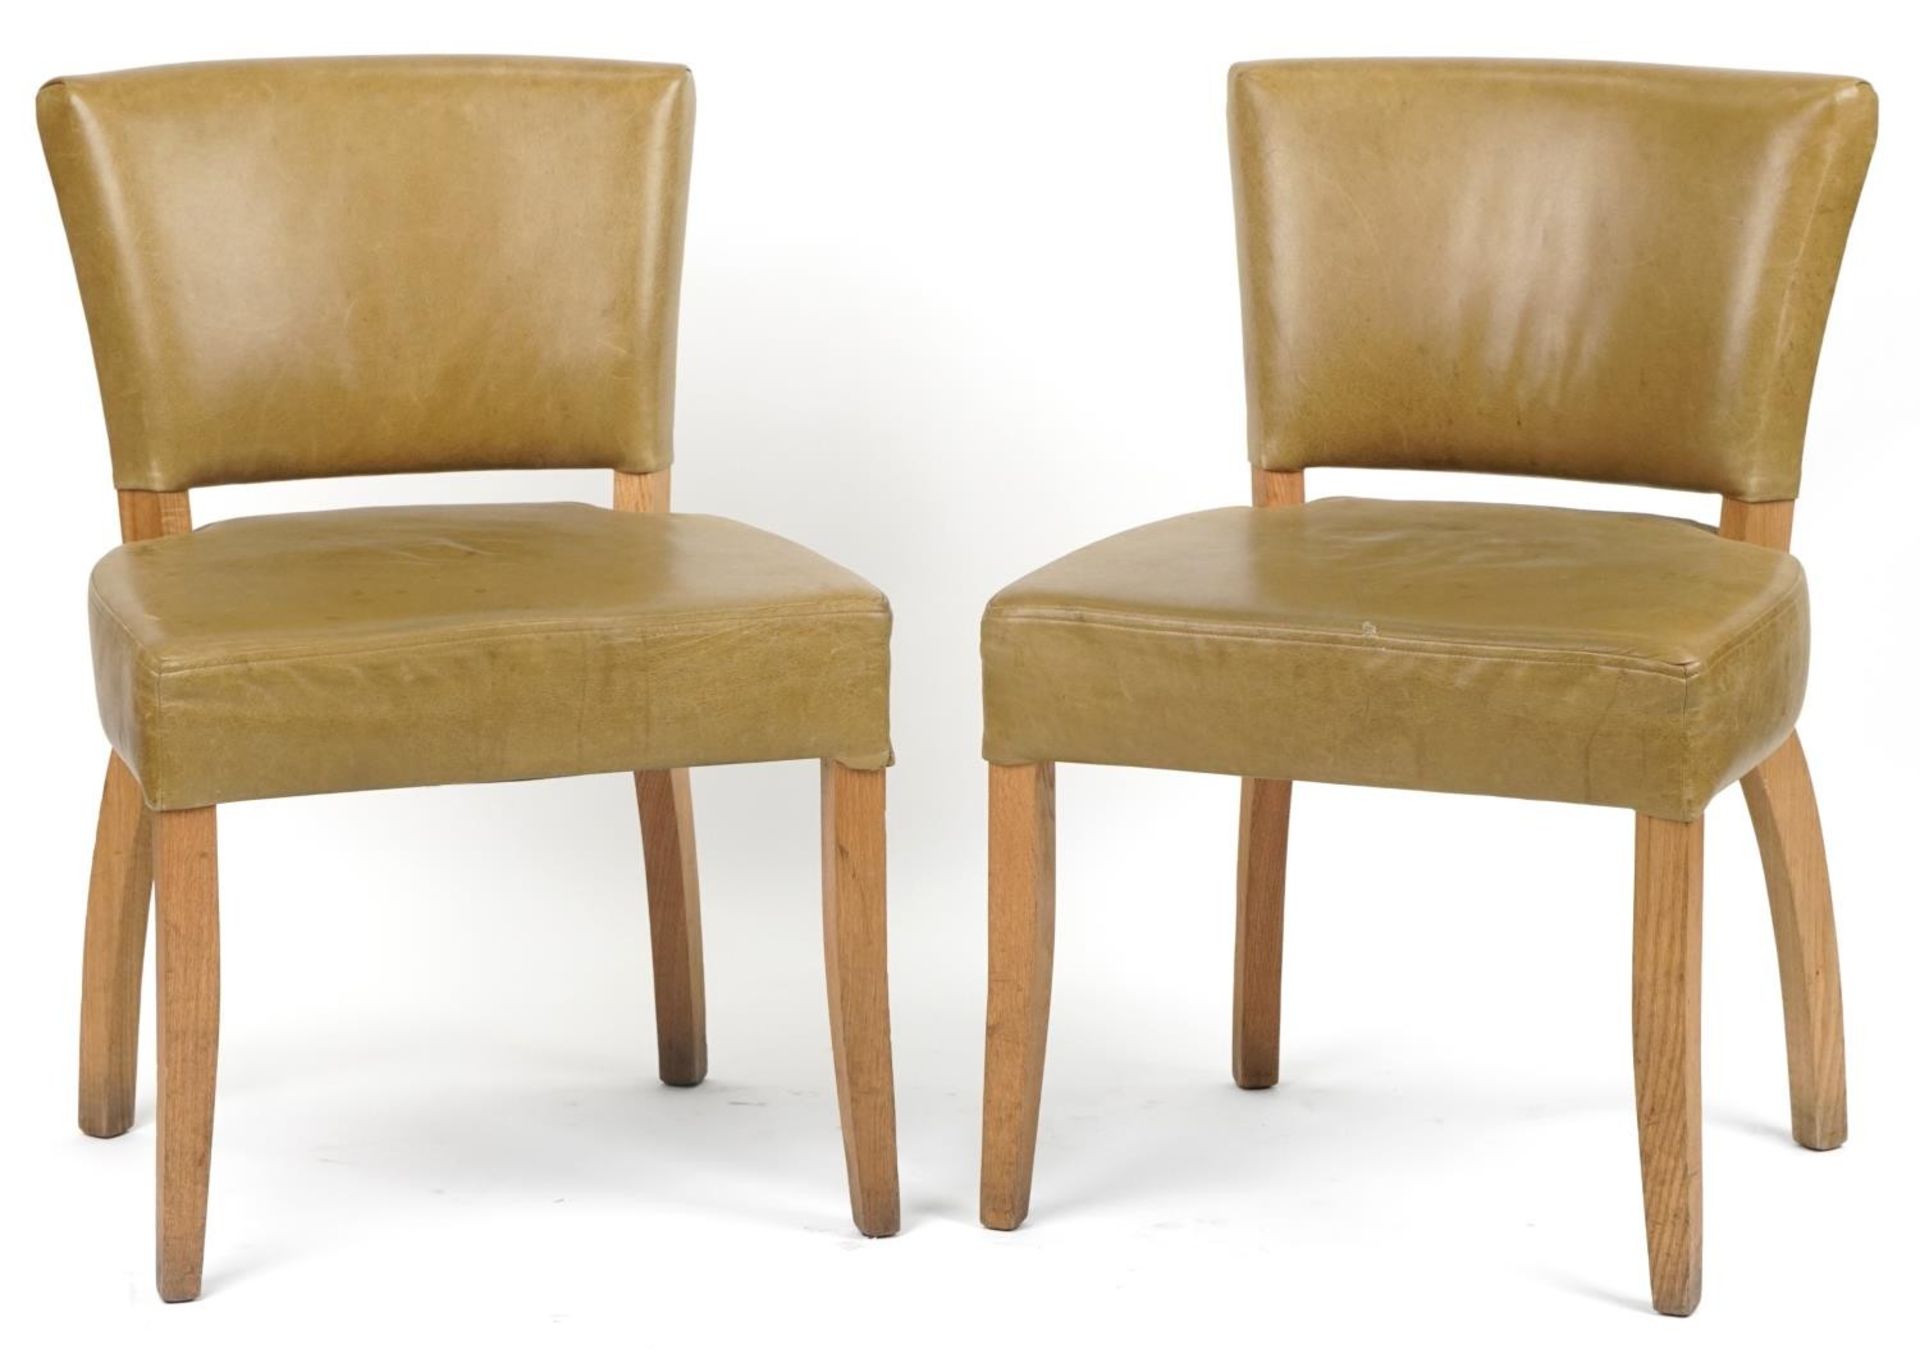 Wych Wood Design, pair of contemporary light oak chairs with green leather upholstery, 87cm high